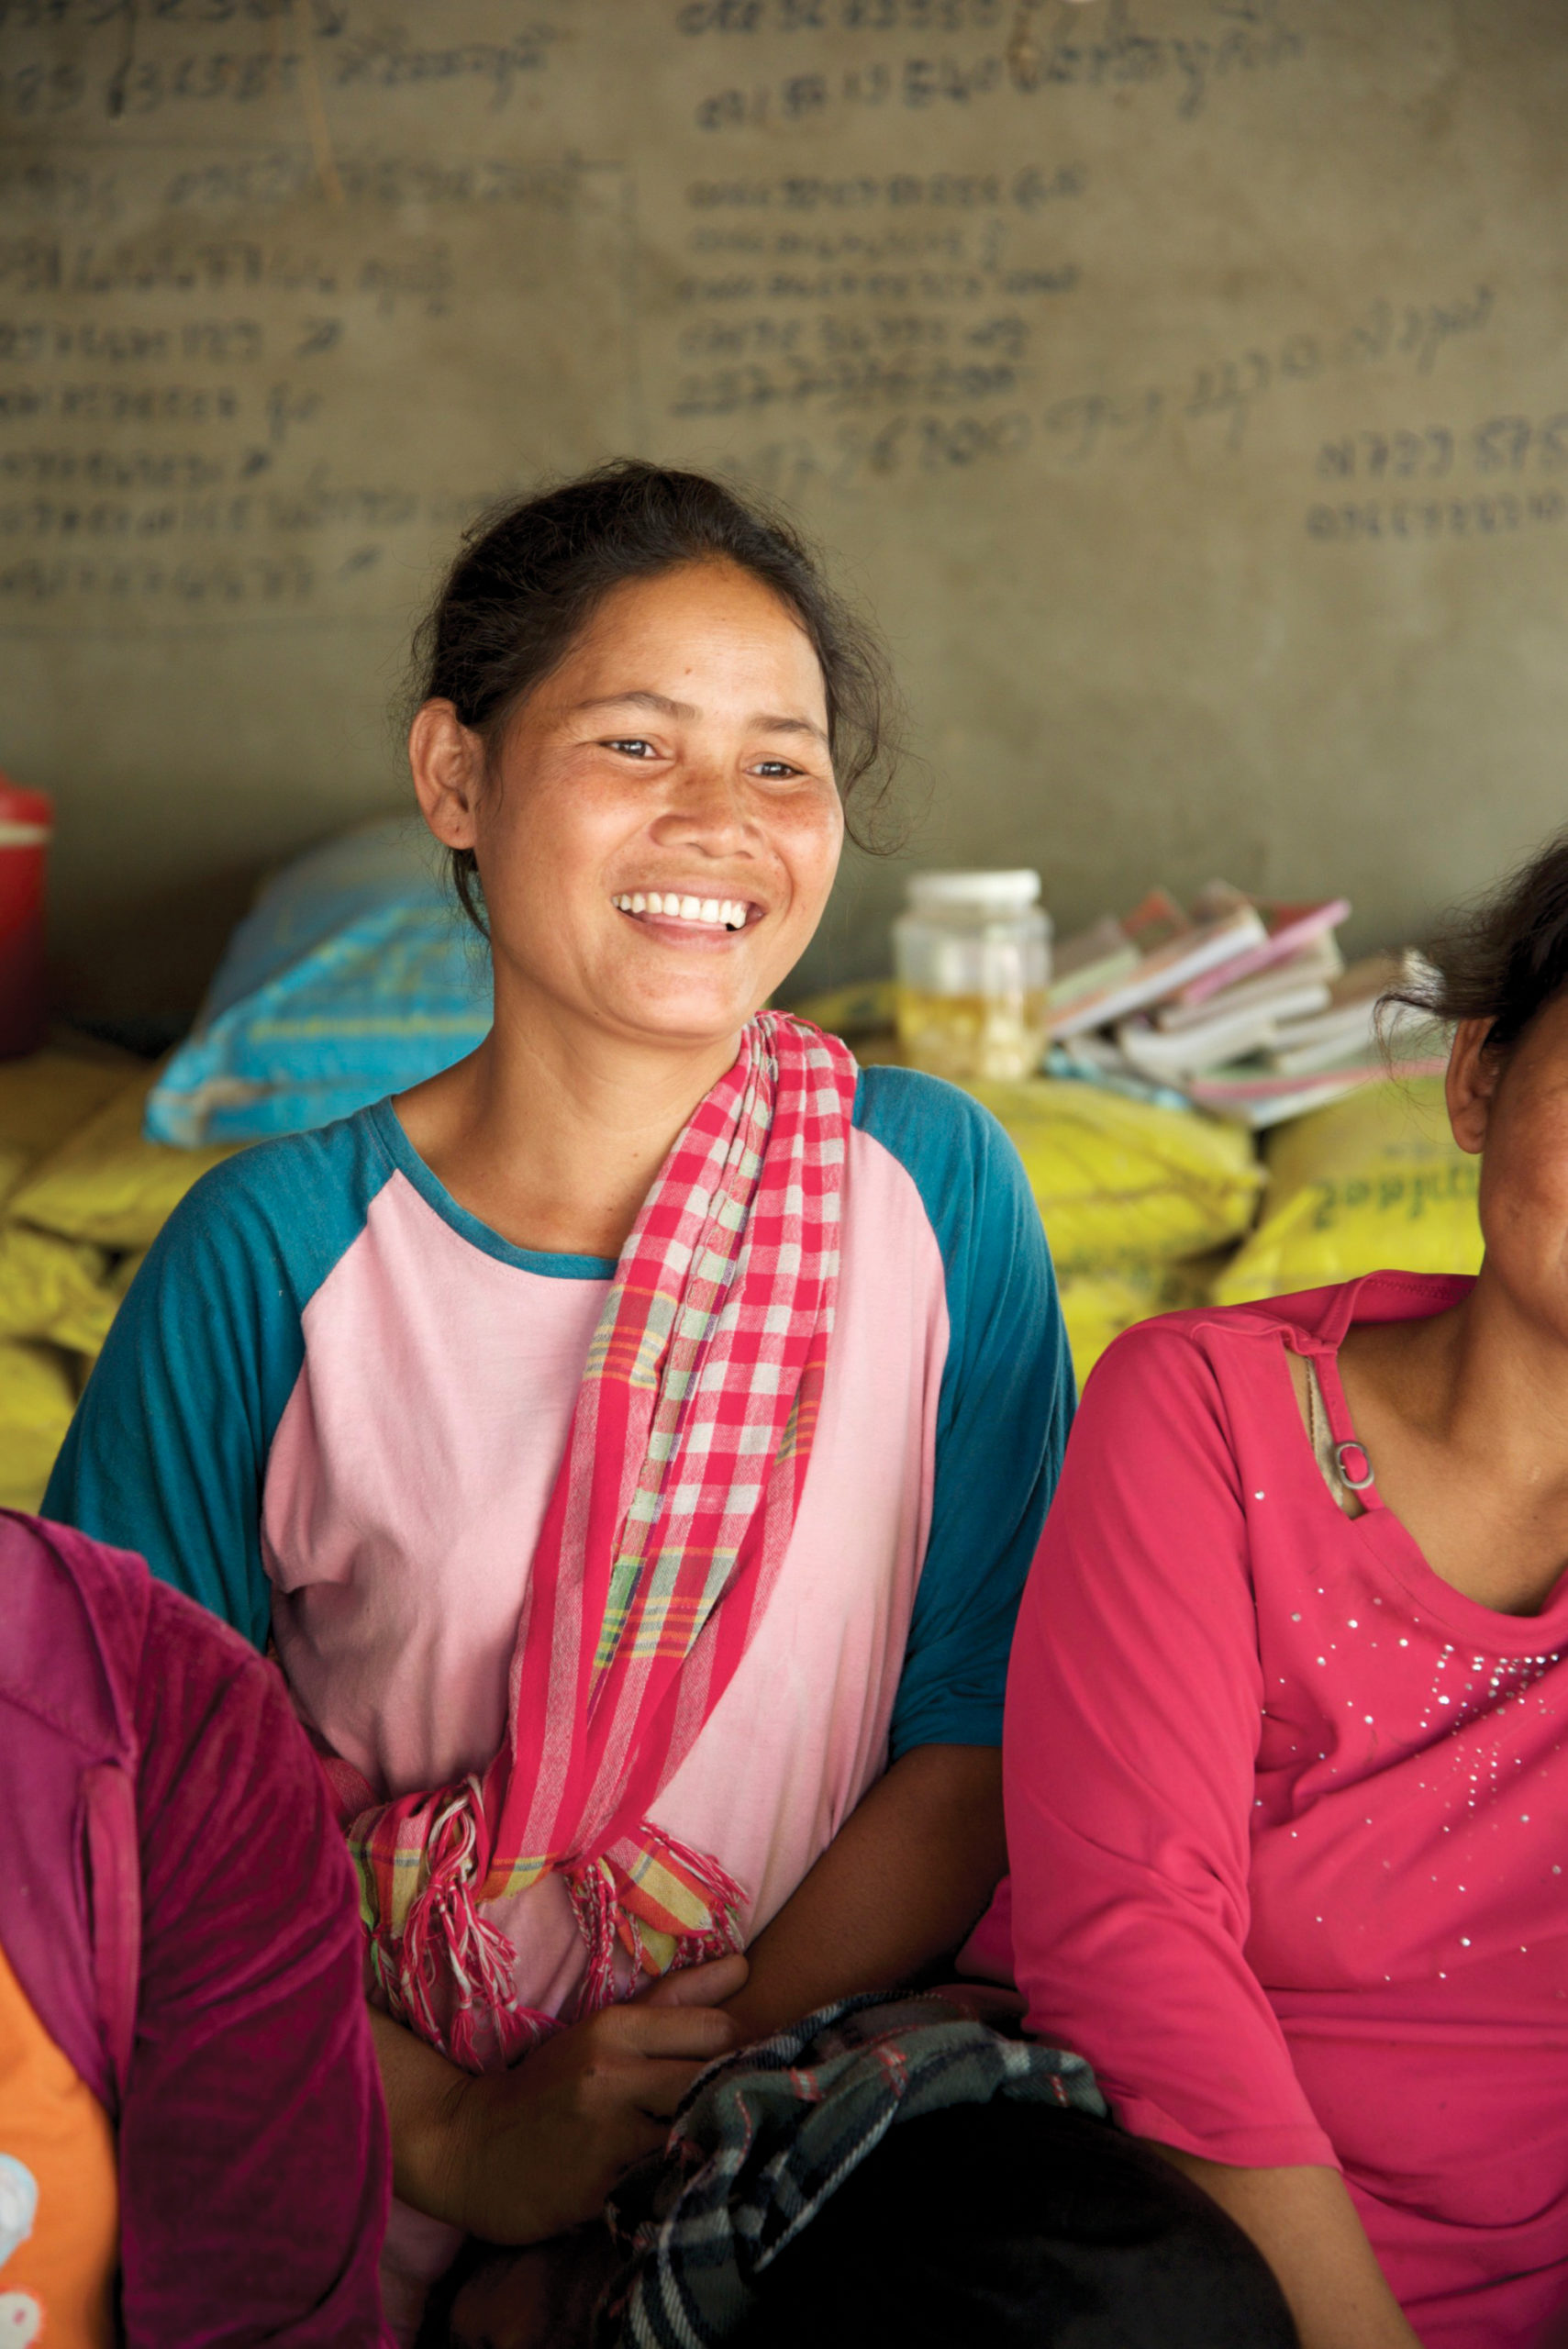 Yai, a mother, smiling. Cambodia sponsorship helps care for her family and her children's education.